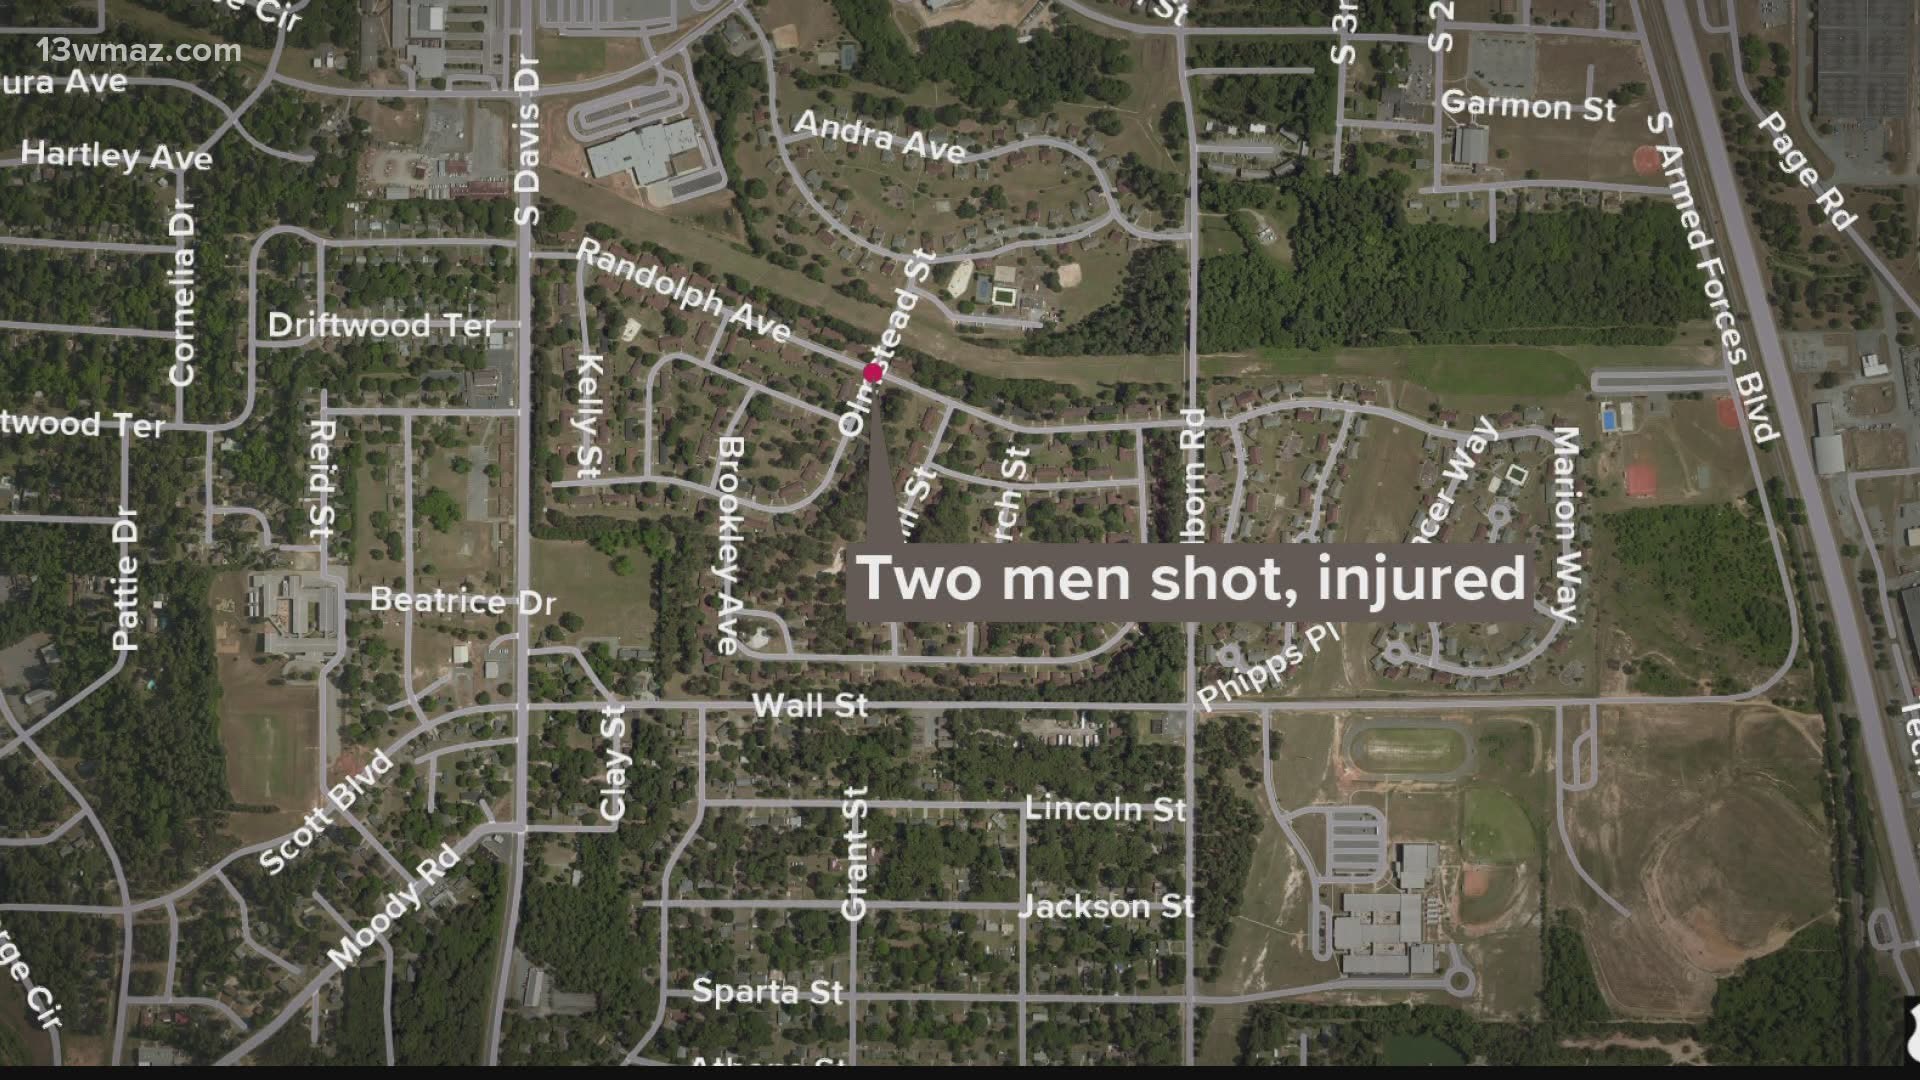 The release says two men were in a truck when they had an argument and shot each other.